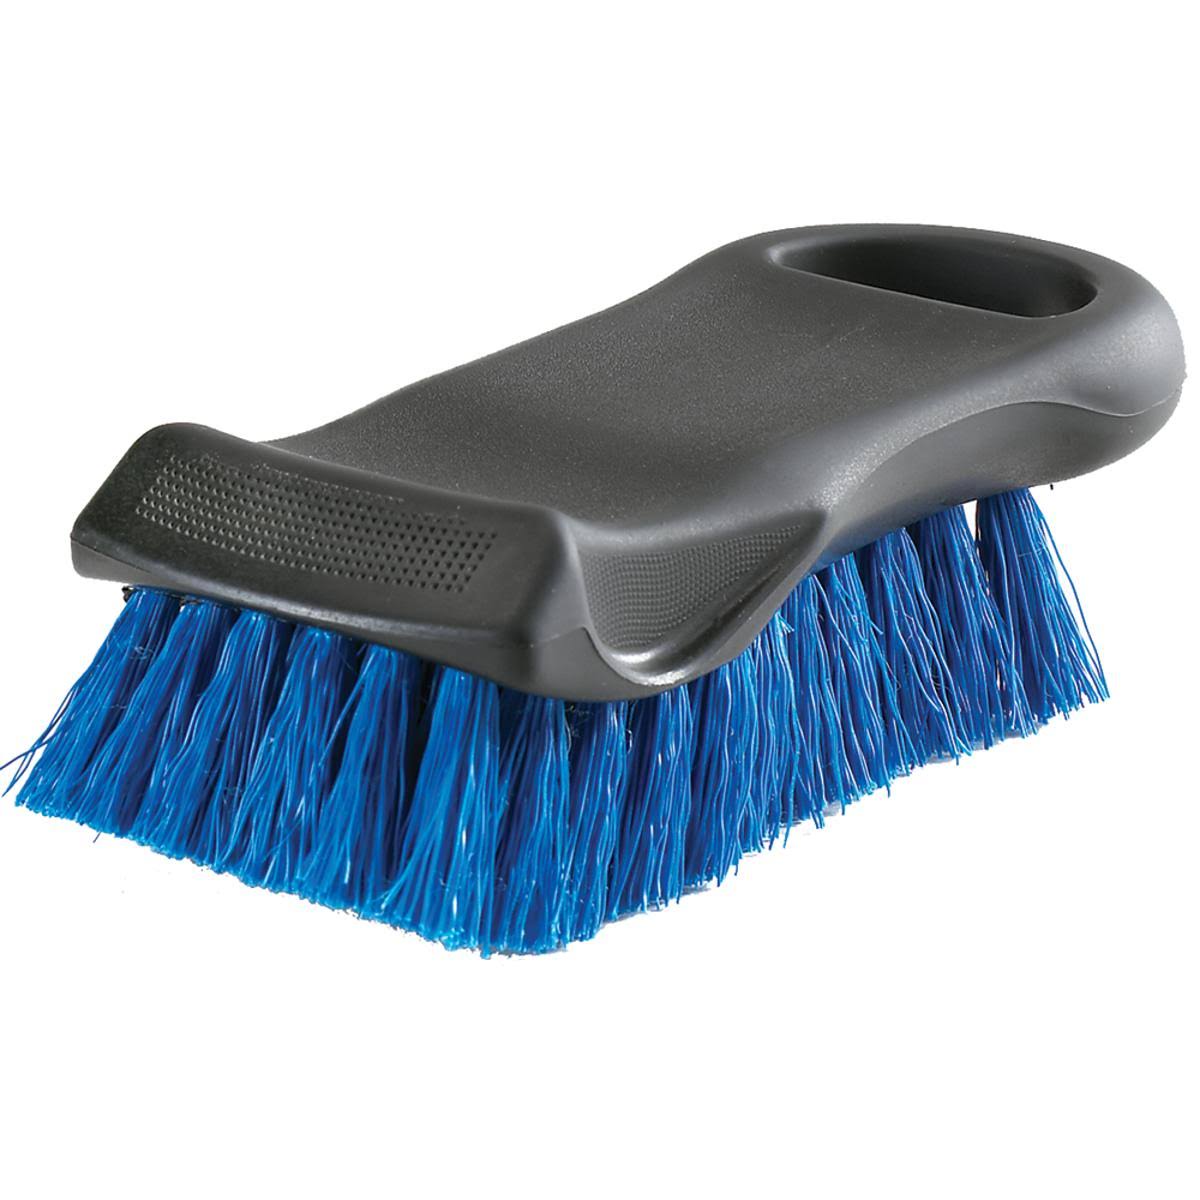 Shurhold Pad Cleaning And Utility Brush